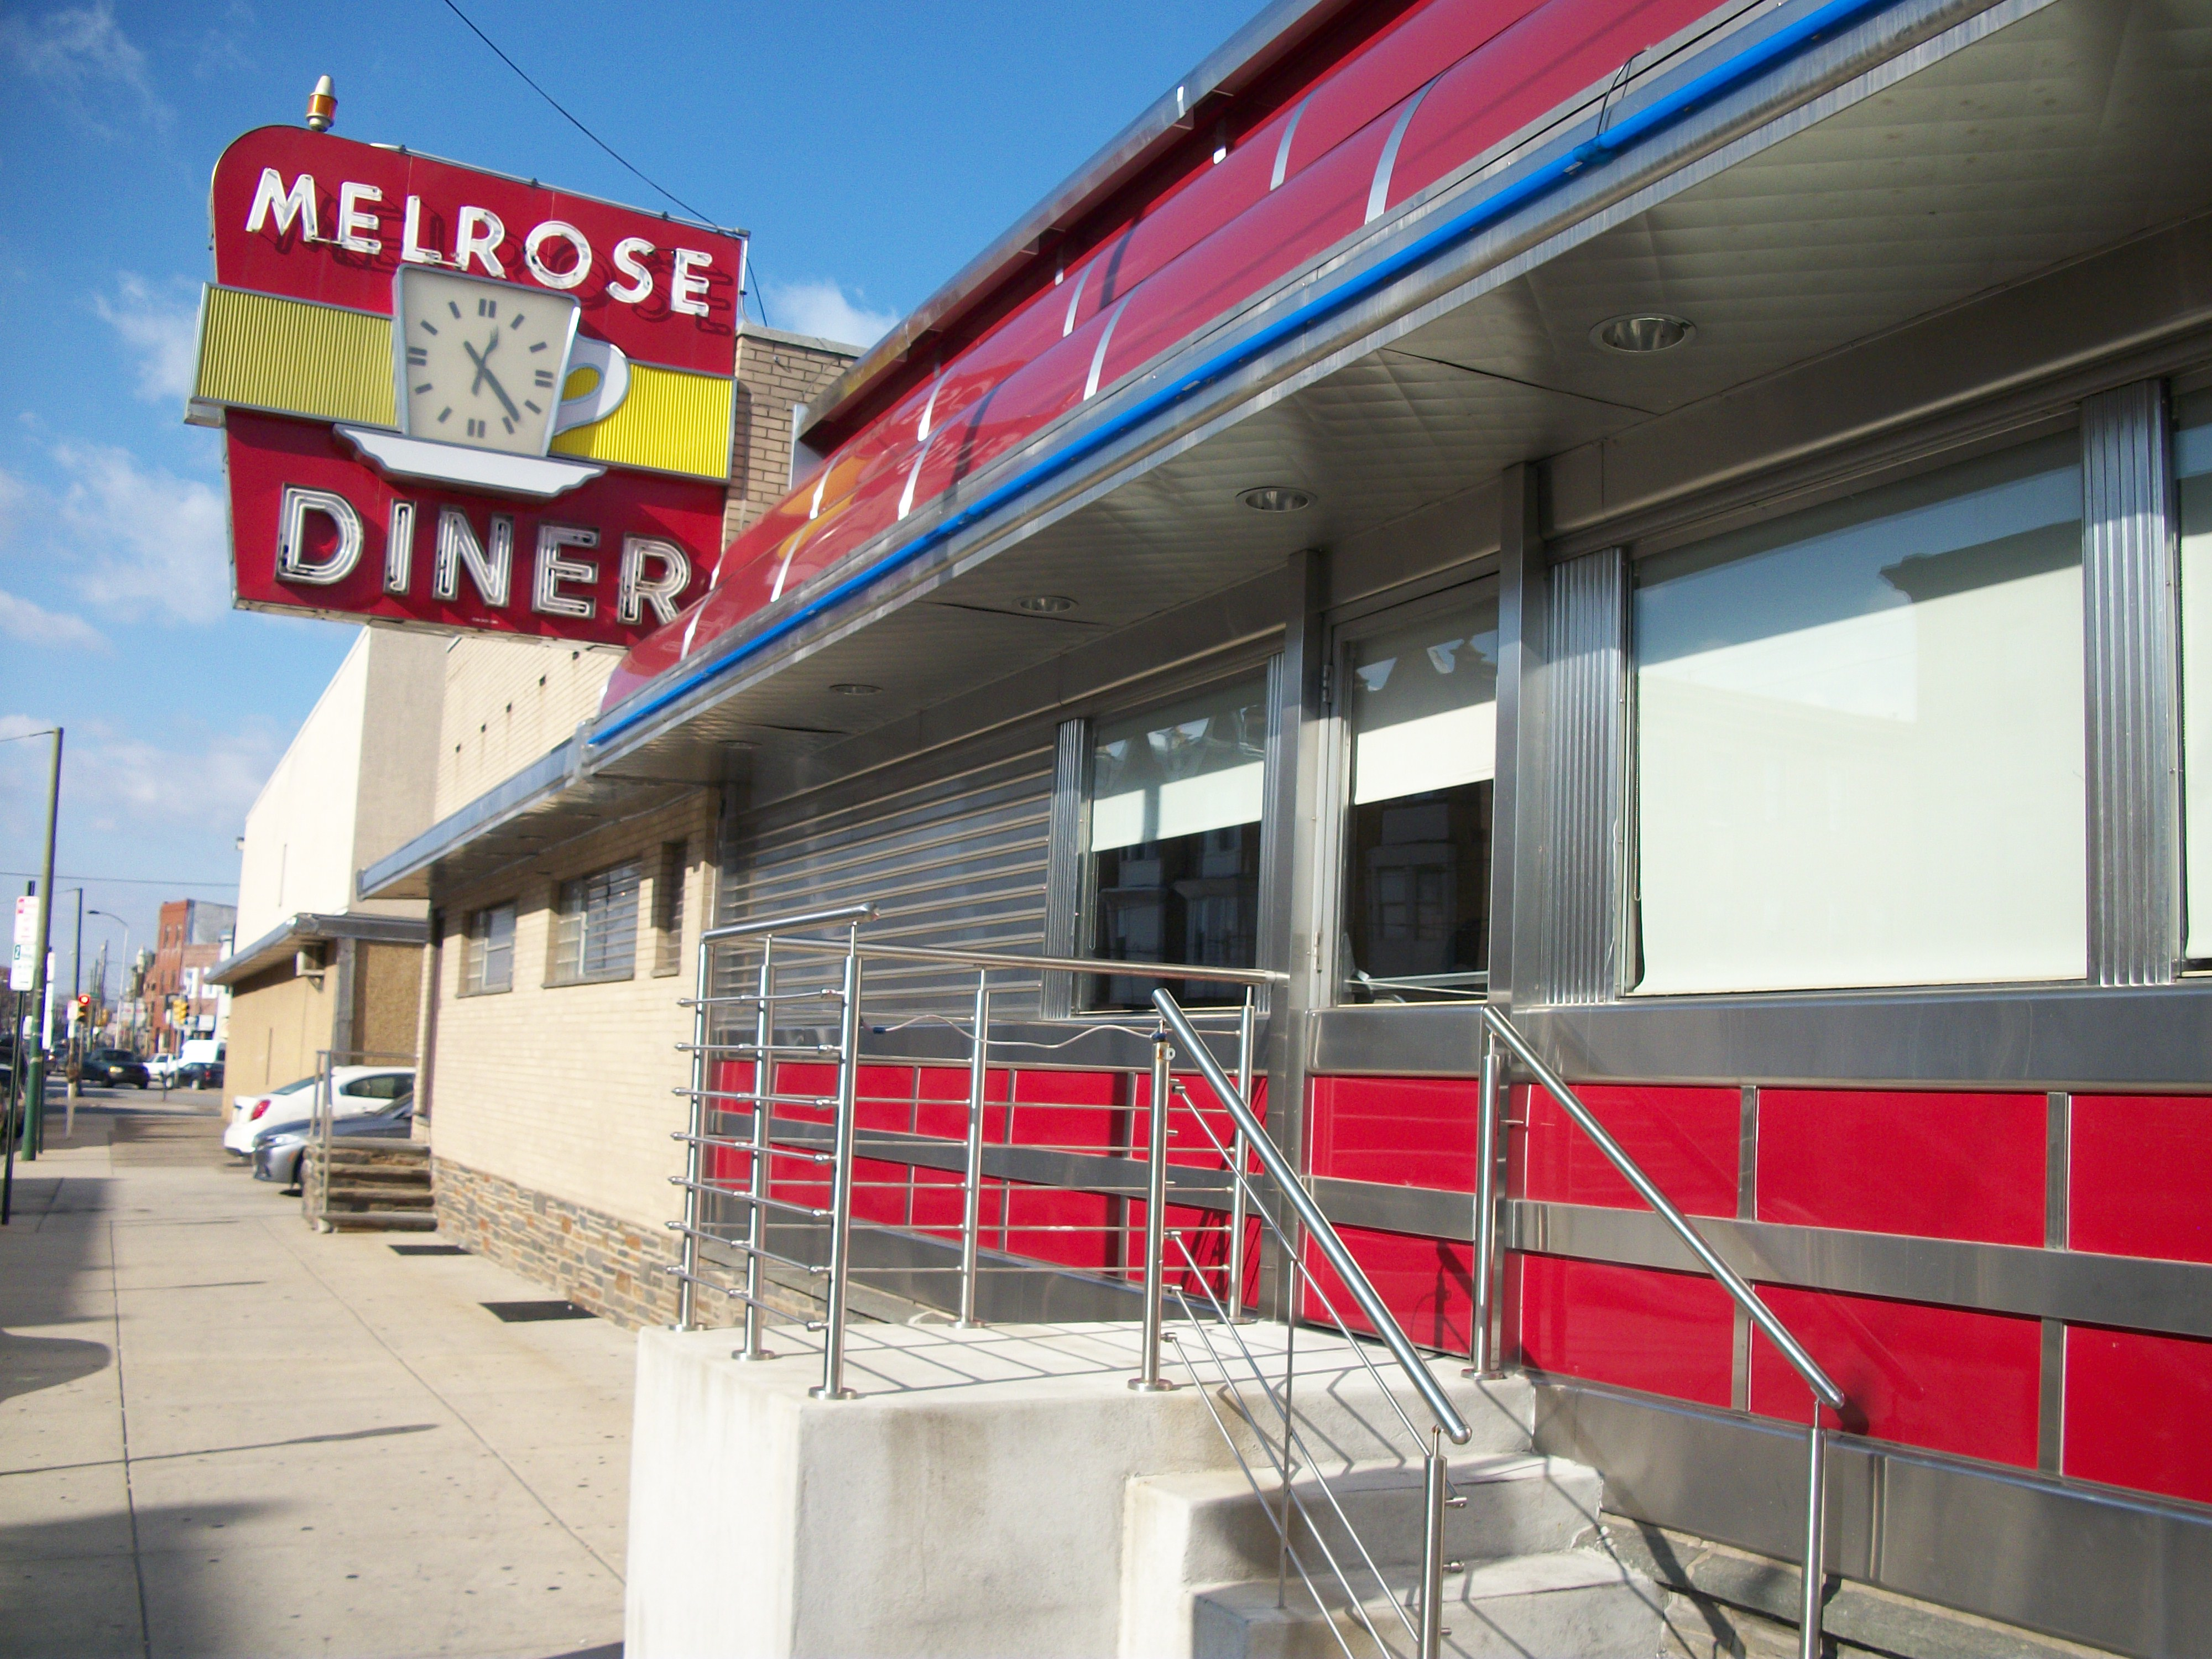 File:Melrose Diner 1119.png - Wikimedia Commons